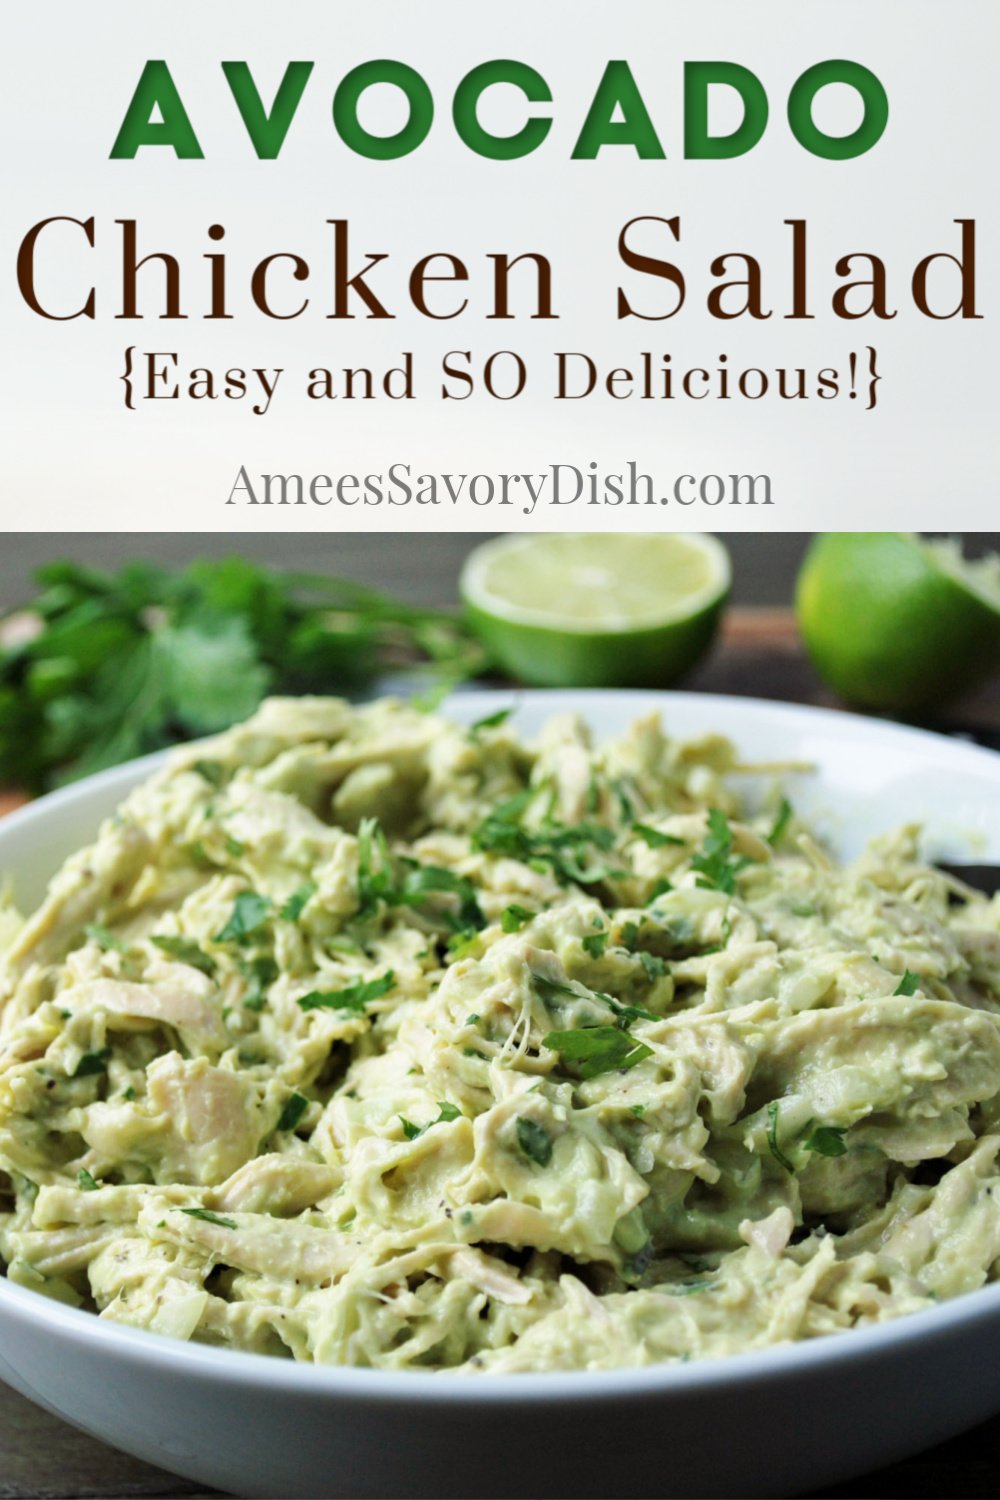 Guacamole meets chicken in this mouthwatering avocado chicken salad. This twist on chicken salad is made with fresh cilantro, lime, avocados, and sour cream. #chickensalad #avocadochickensalad #chickenrecipe #avocadorecipe via @Ameessavorydish